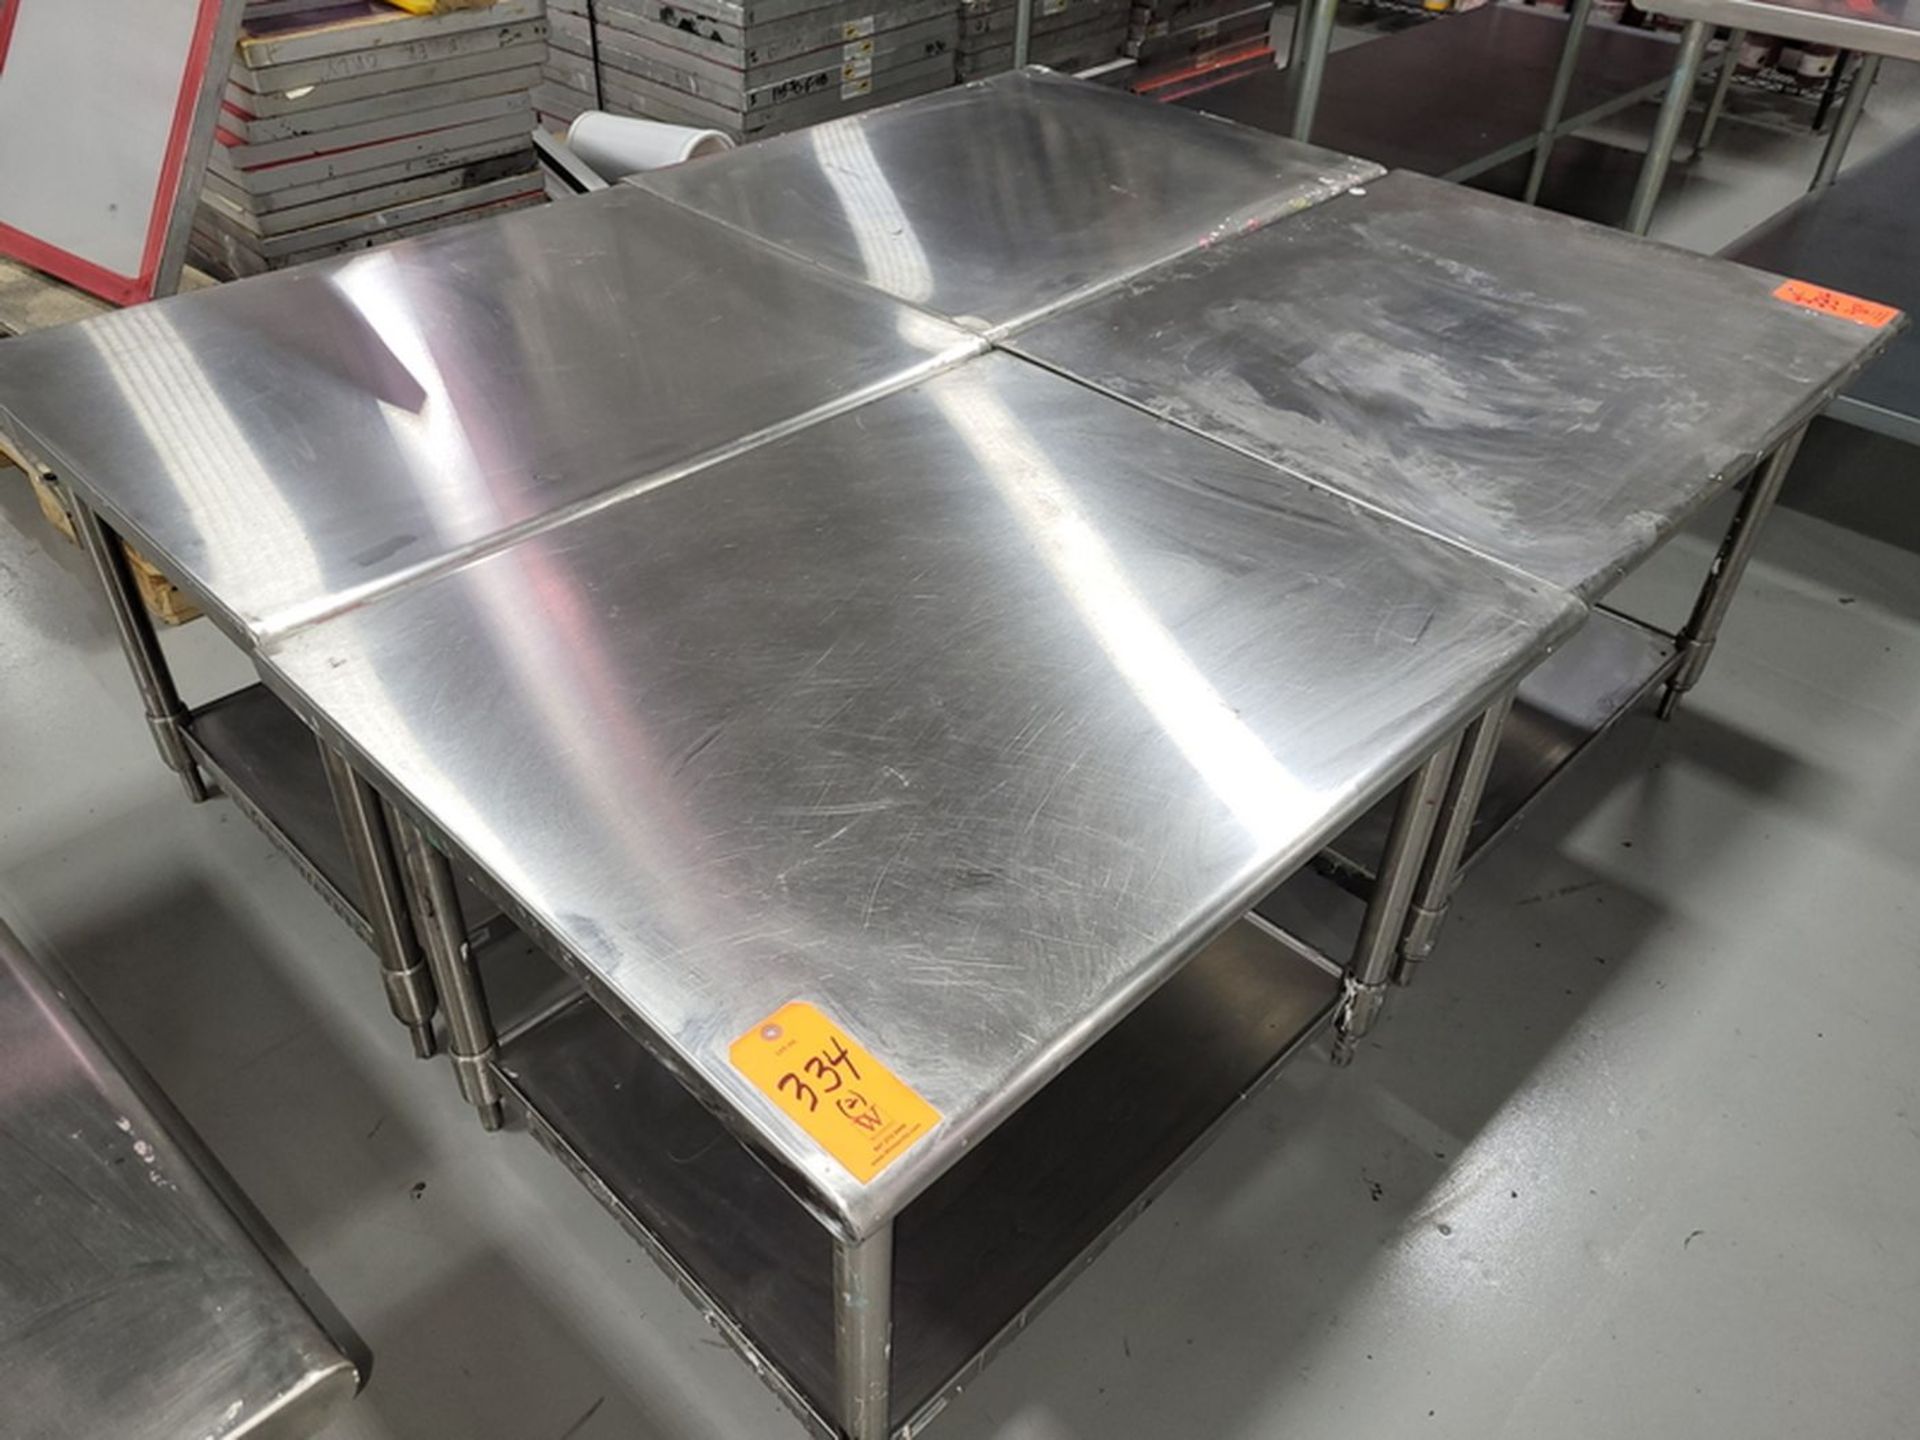 Lot - (4) Stainless Steel Tables; 36 in. w x 30 in. d x 26 in. high - Image 2 of 2